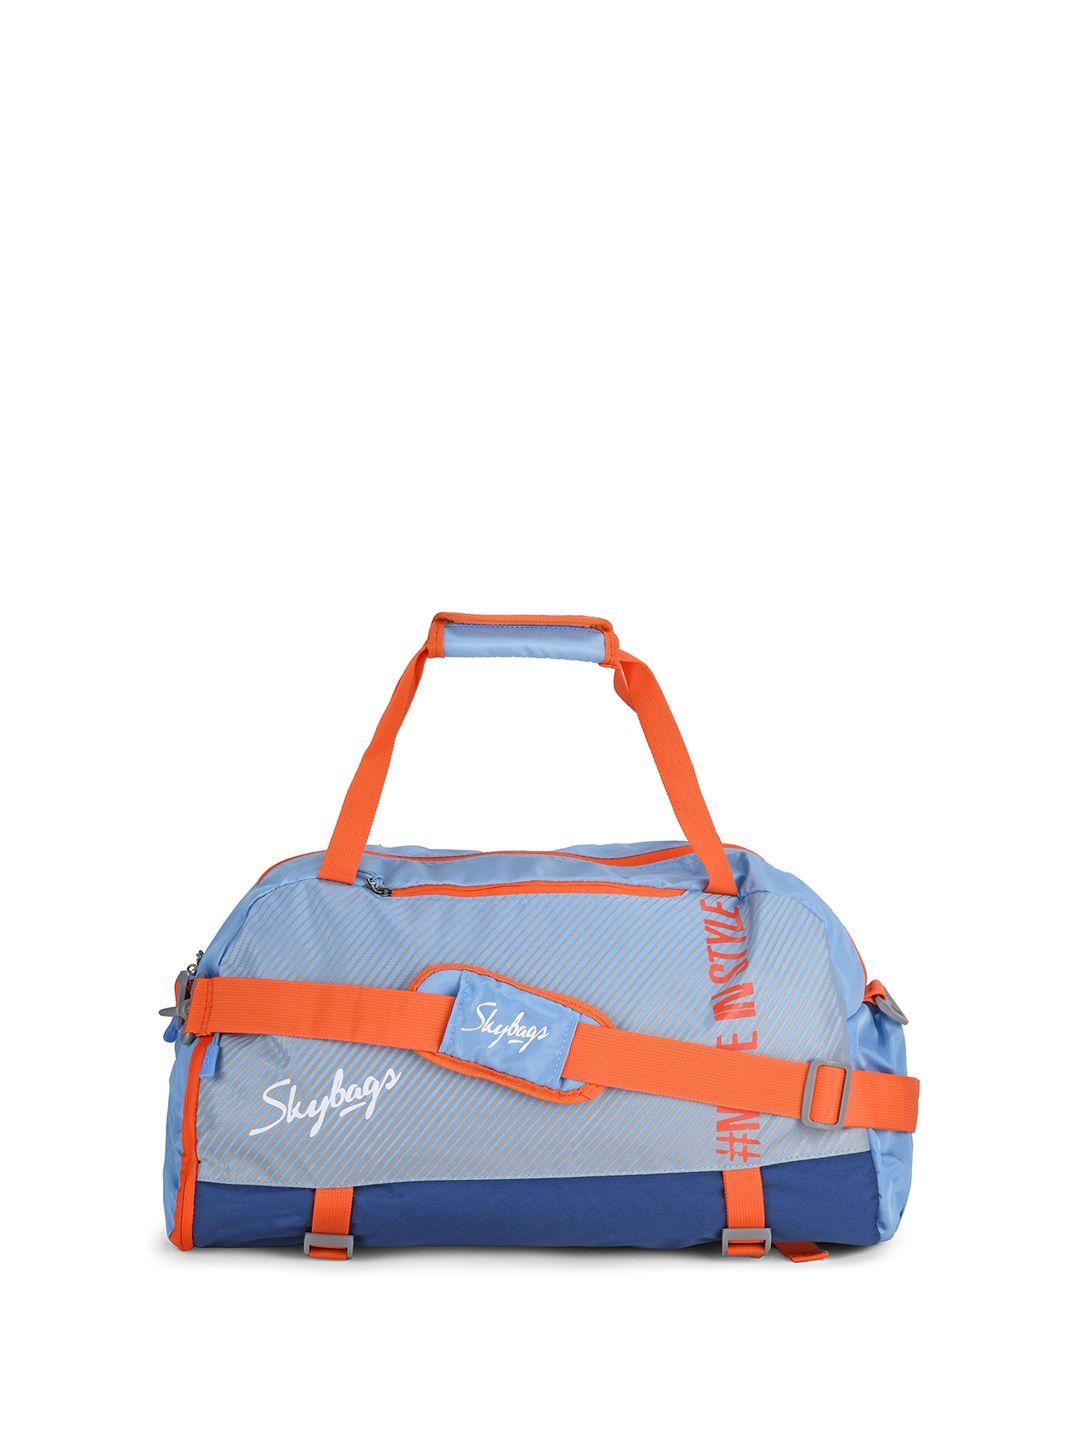 Skybags Striped Small Duffel Bag